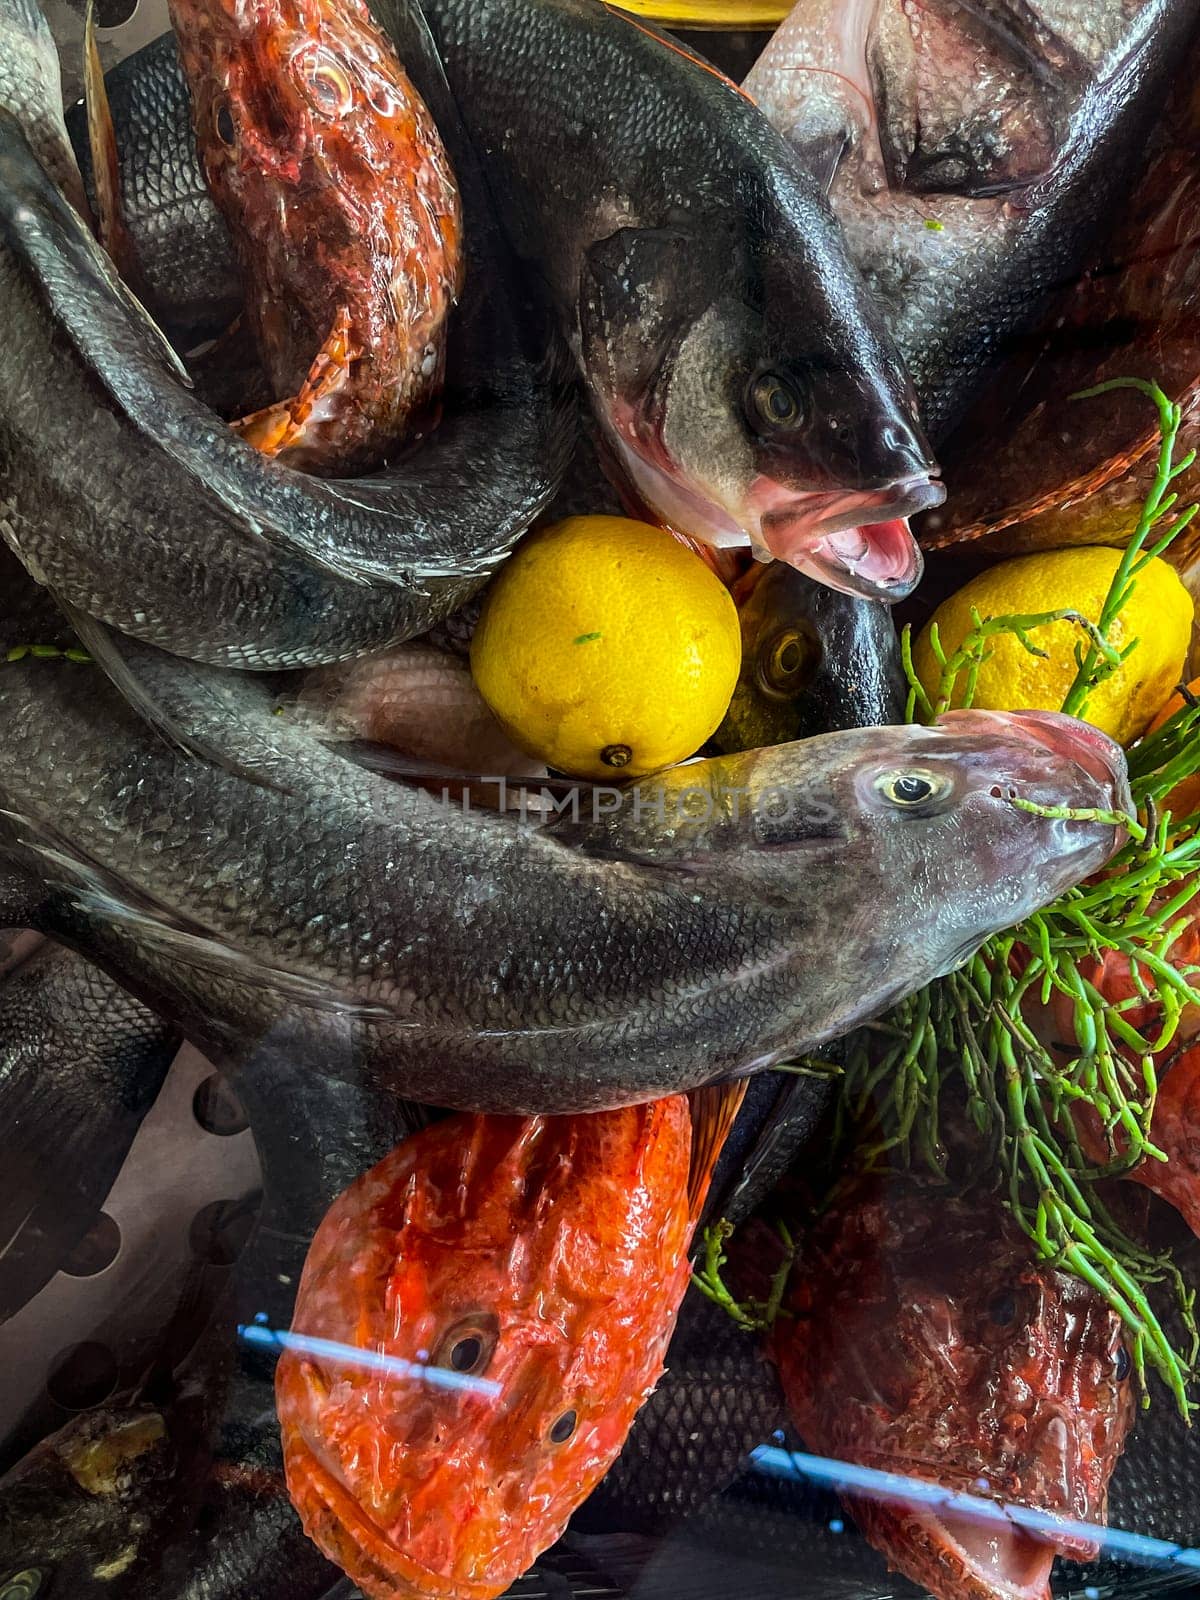 Raw fish fillet with tomatoes and herbs. Against a dark background. Seafood on ice at the fish market. Seafood. Healthy diet eating concept. View from above. by Costin